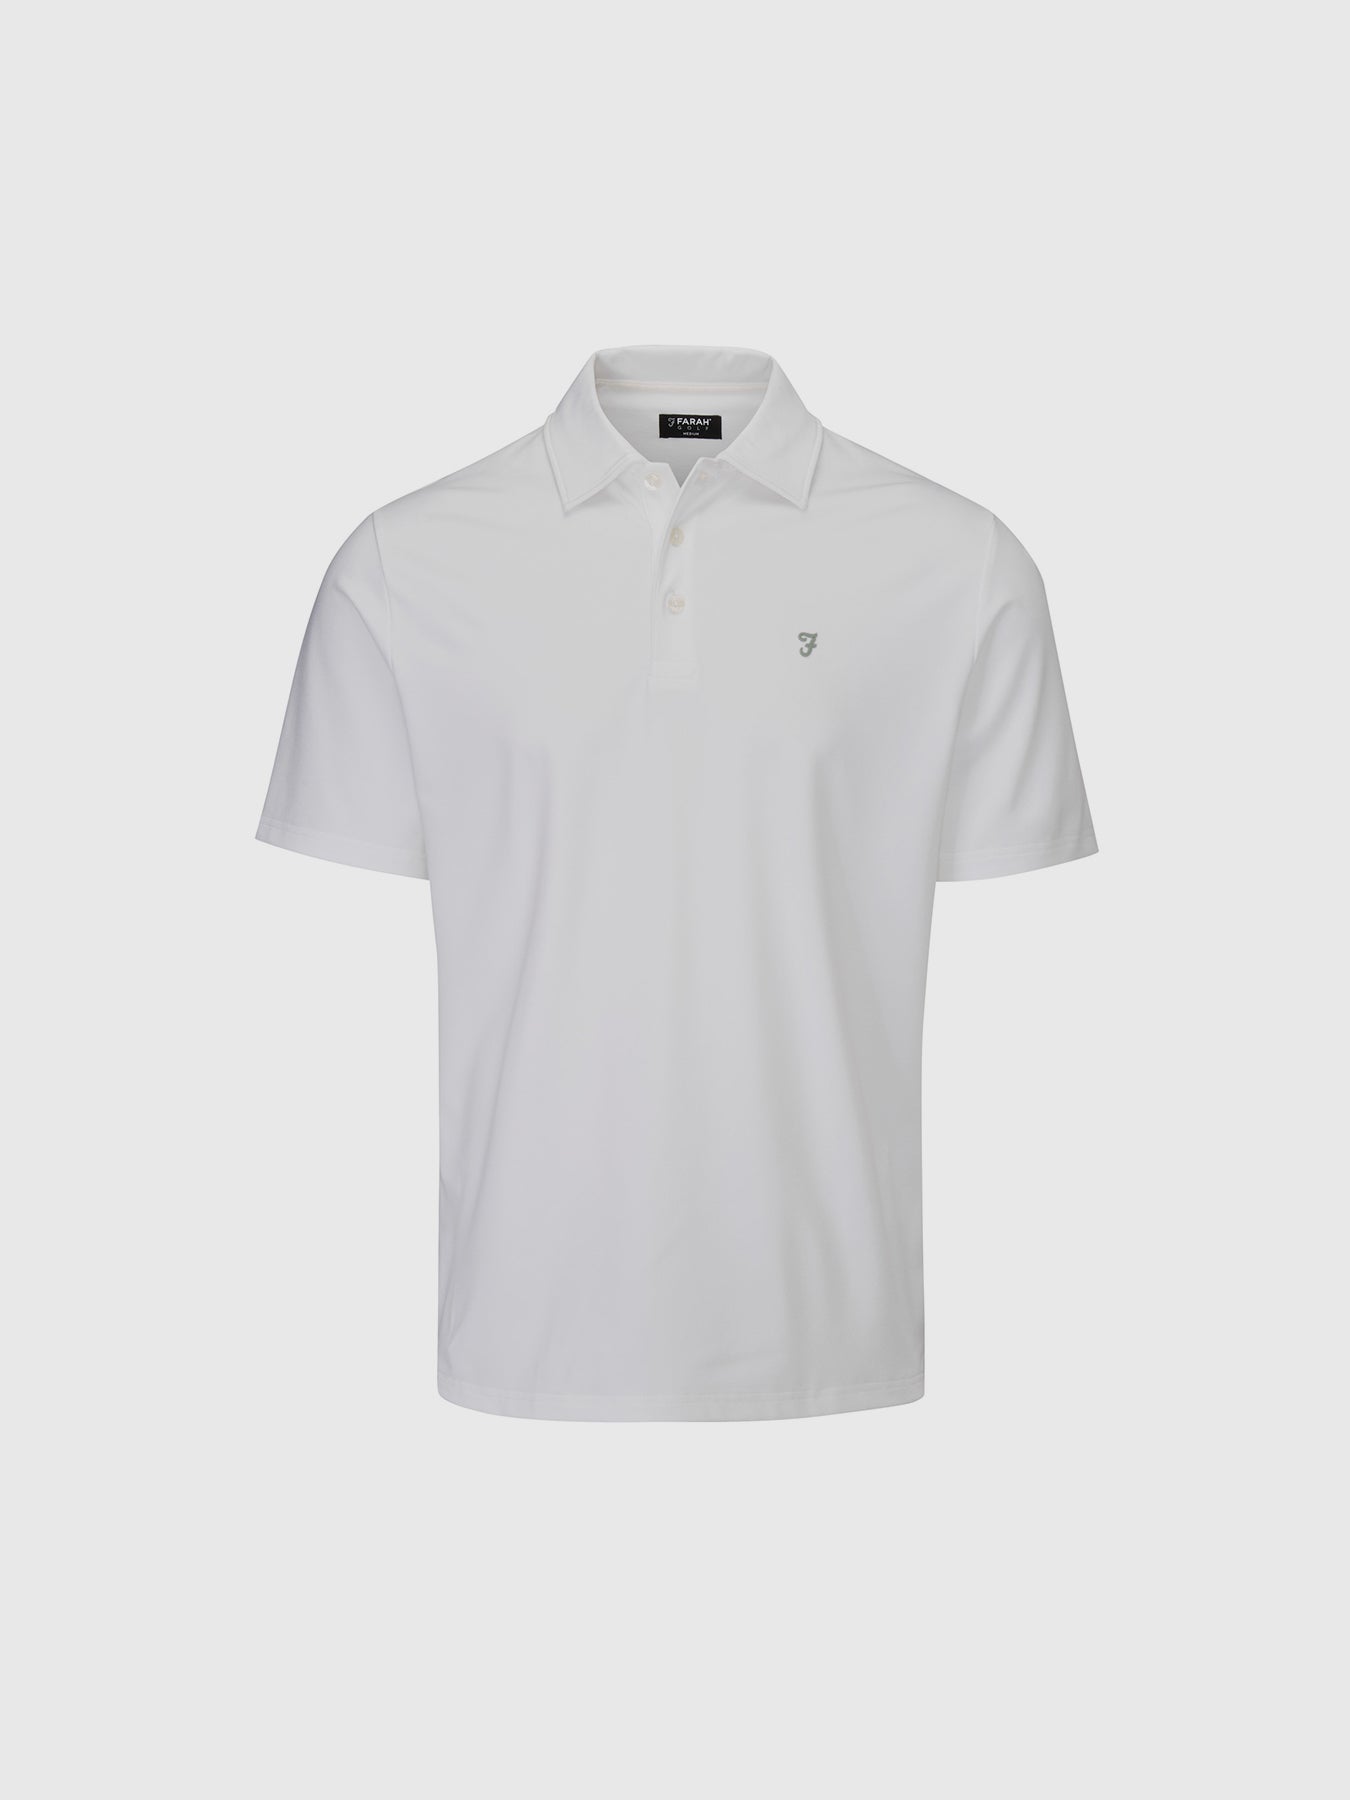 View Keller Golf Polo Shirt In White information